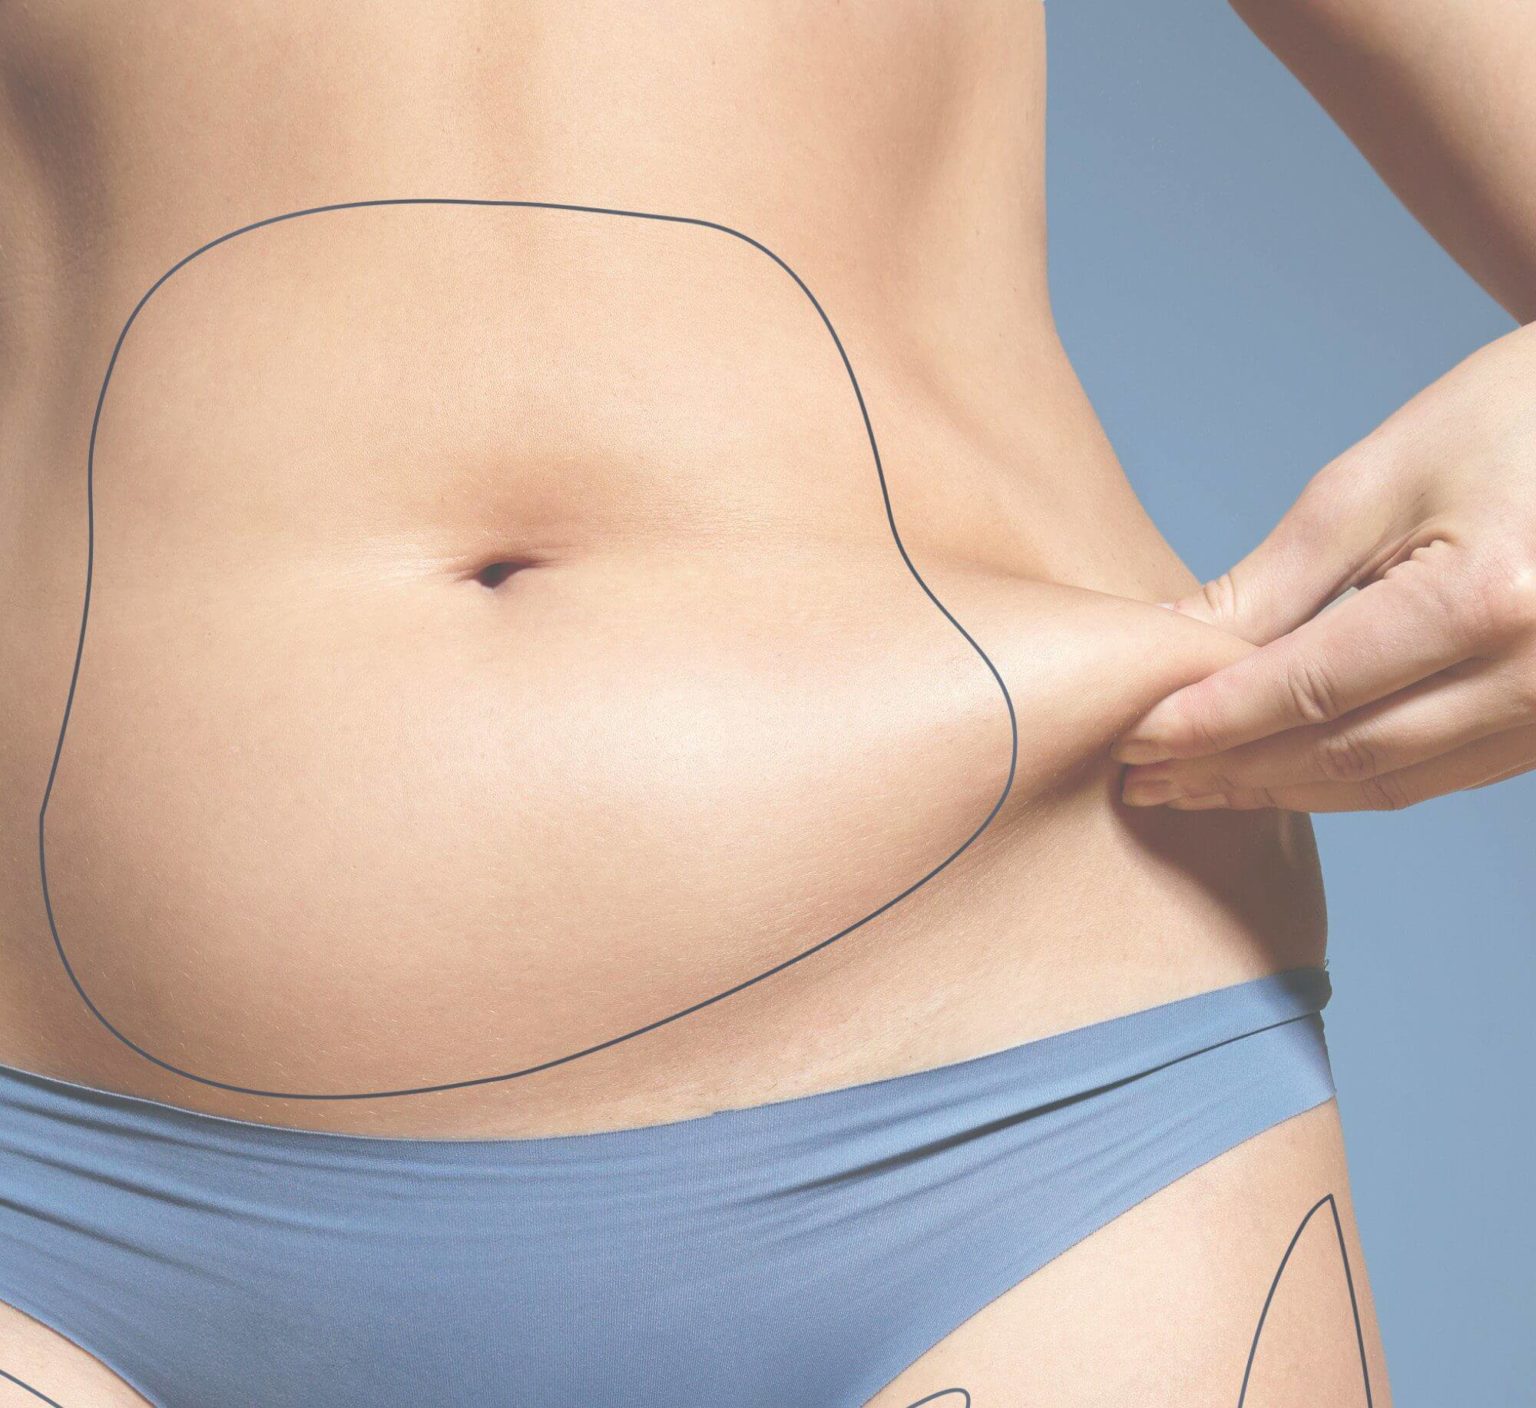 Are You a Good CoolSculpting Candidate?